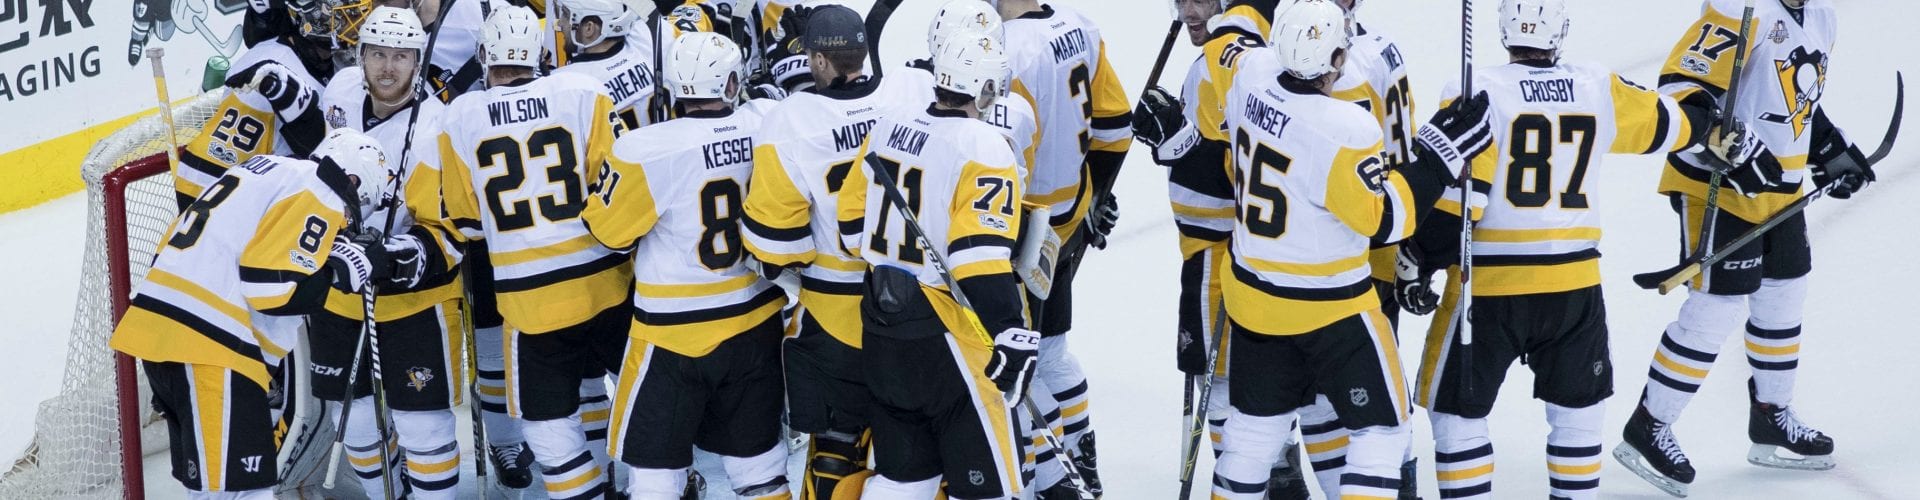 Pittsburgh Penguins Home Games Headline Thursday Tickets On Sale